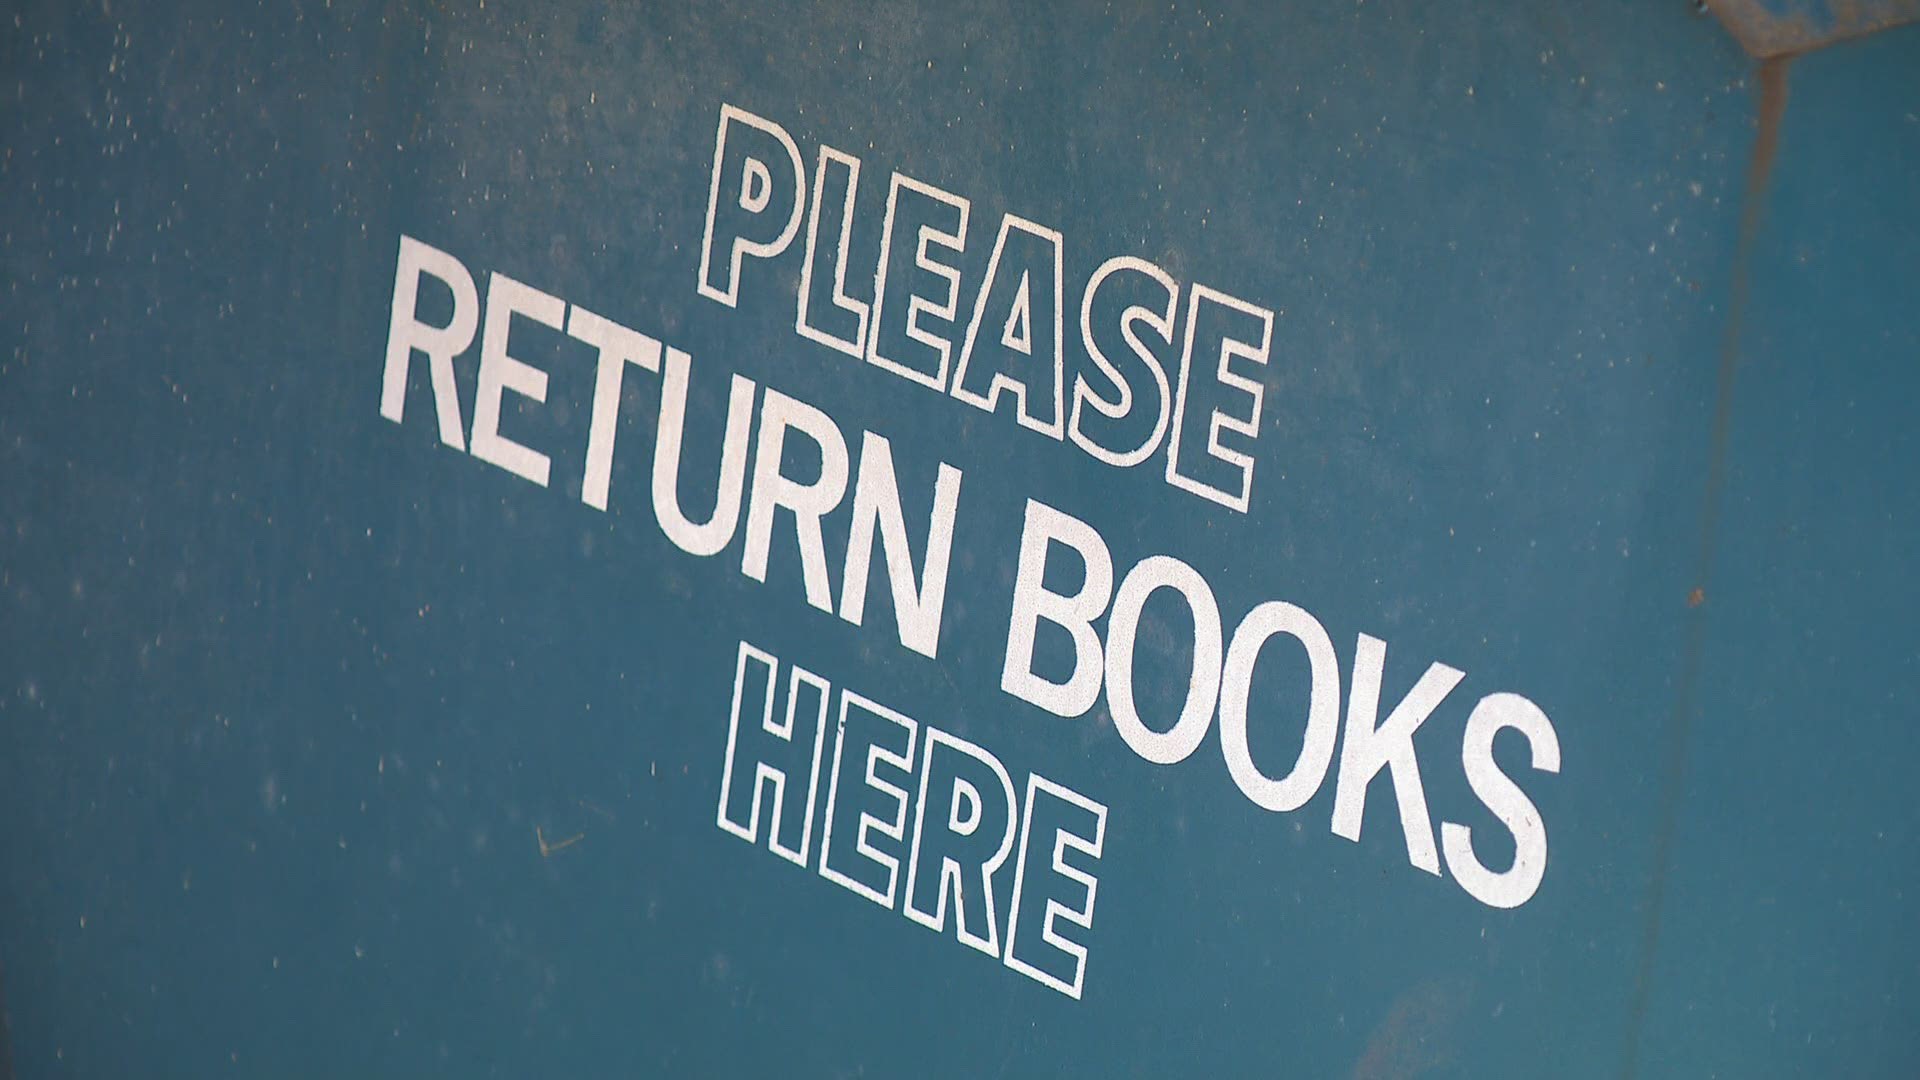 Libraries in West Michigan are slowly beginning the process of reopening.